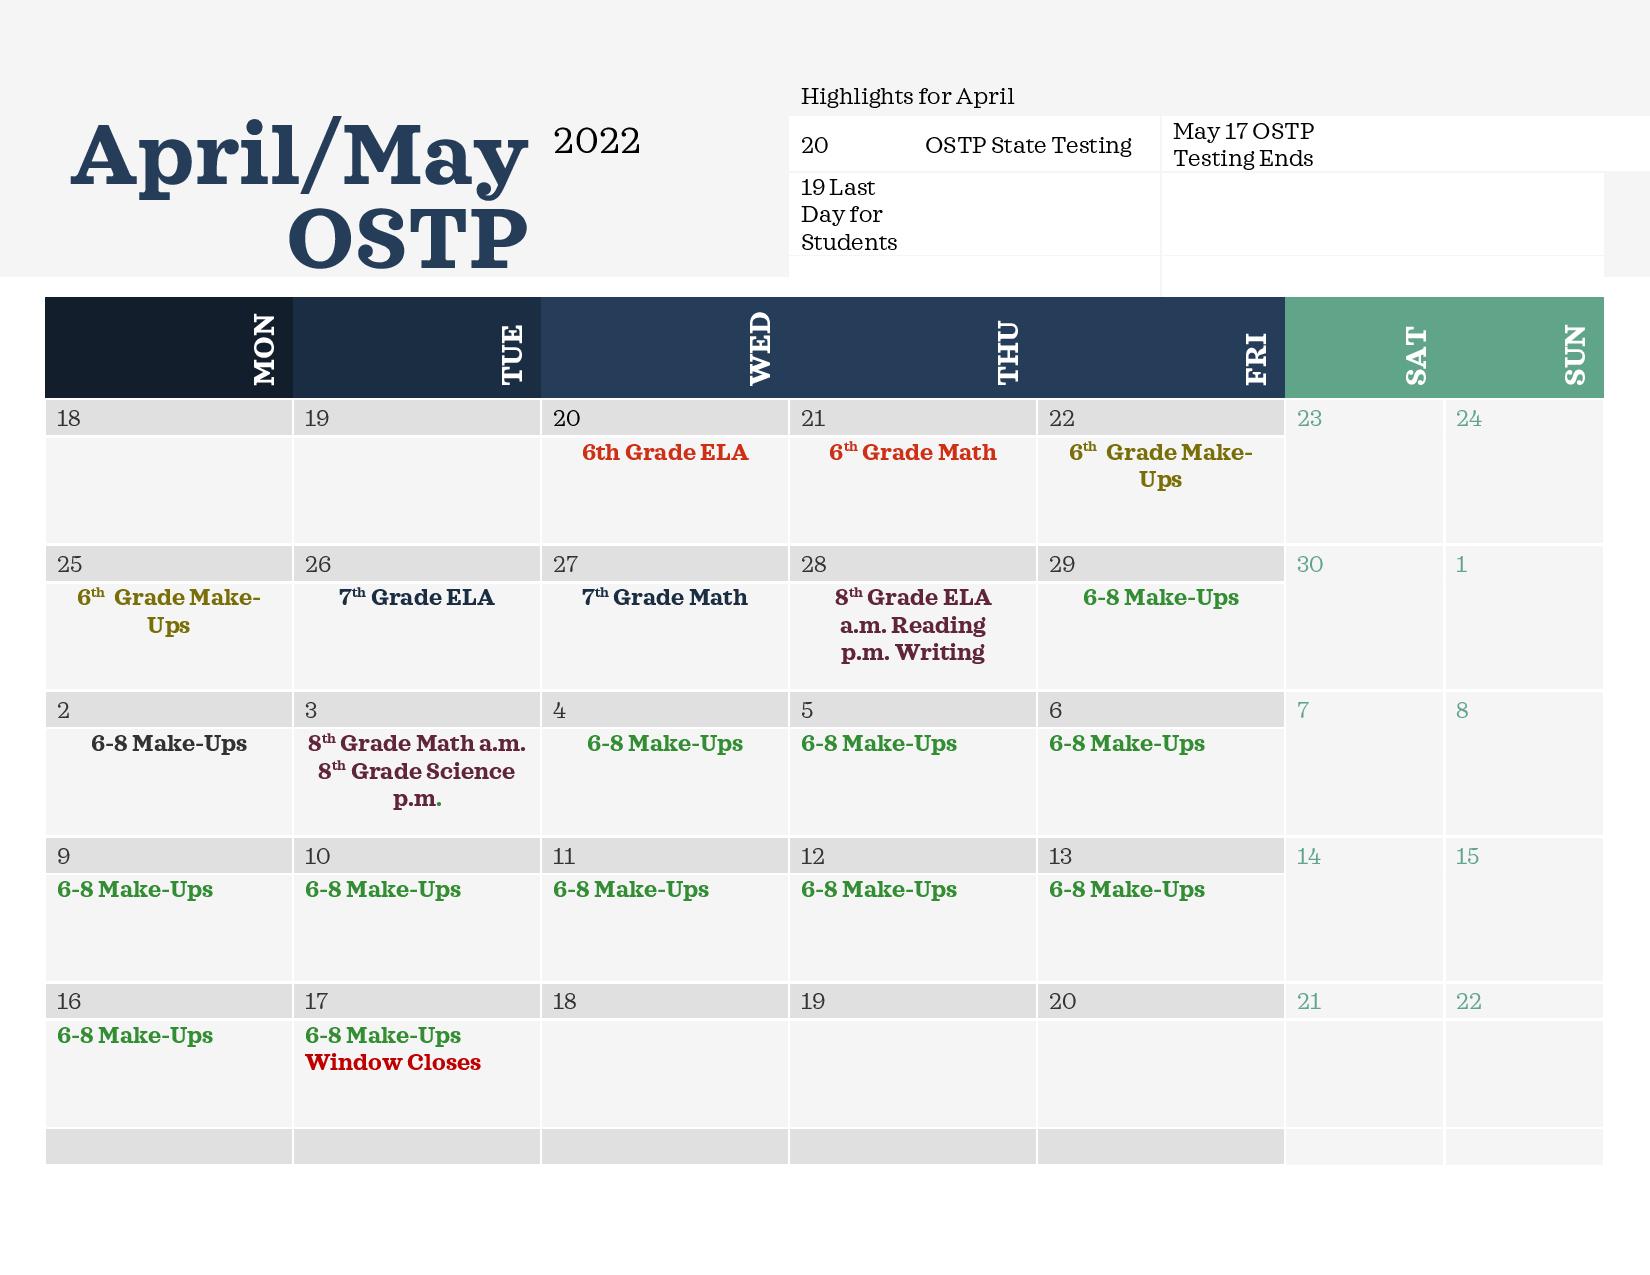 Middle School OSTP April/May